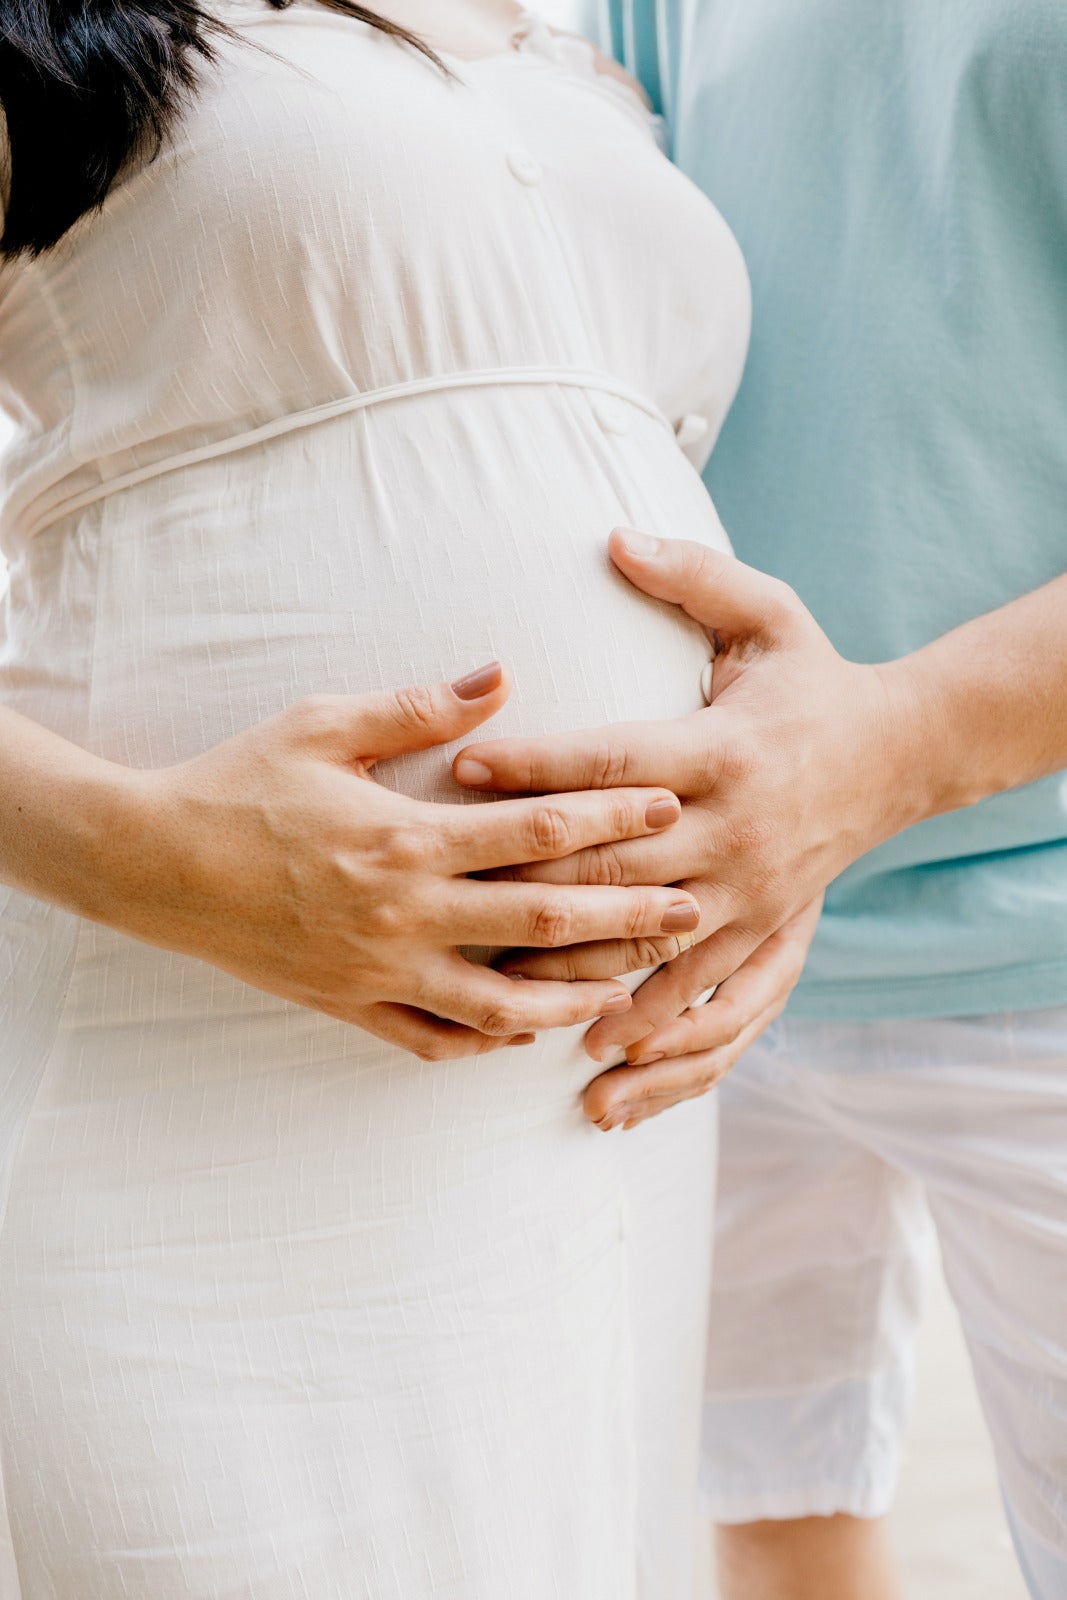 Pregnant woman hand on tummy with husband